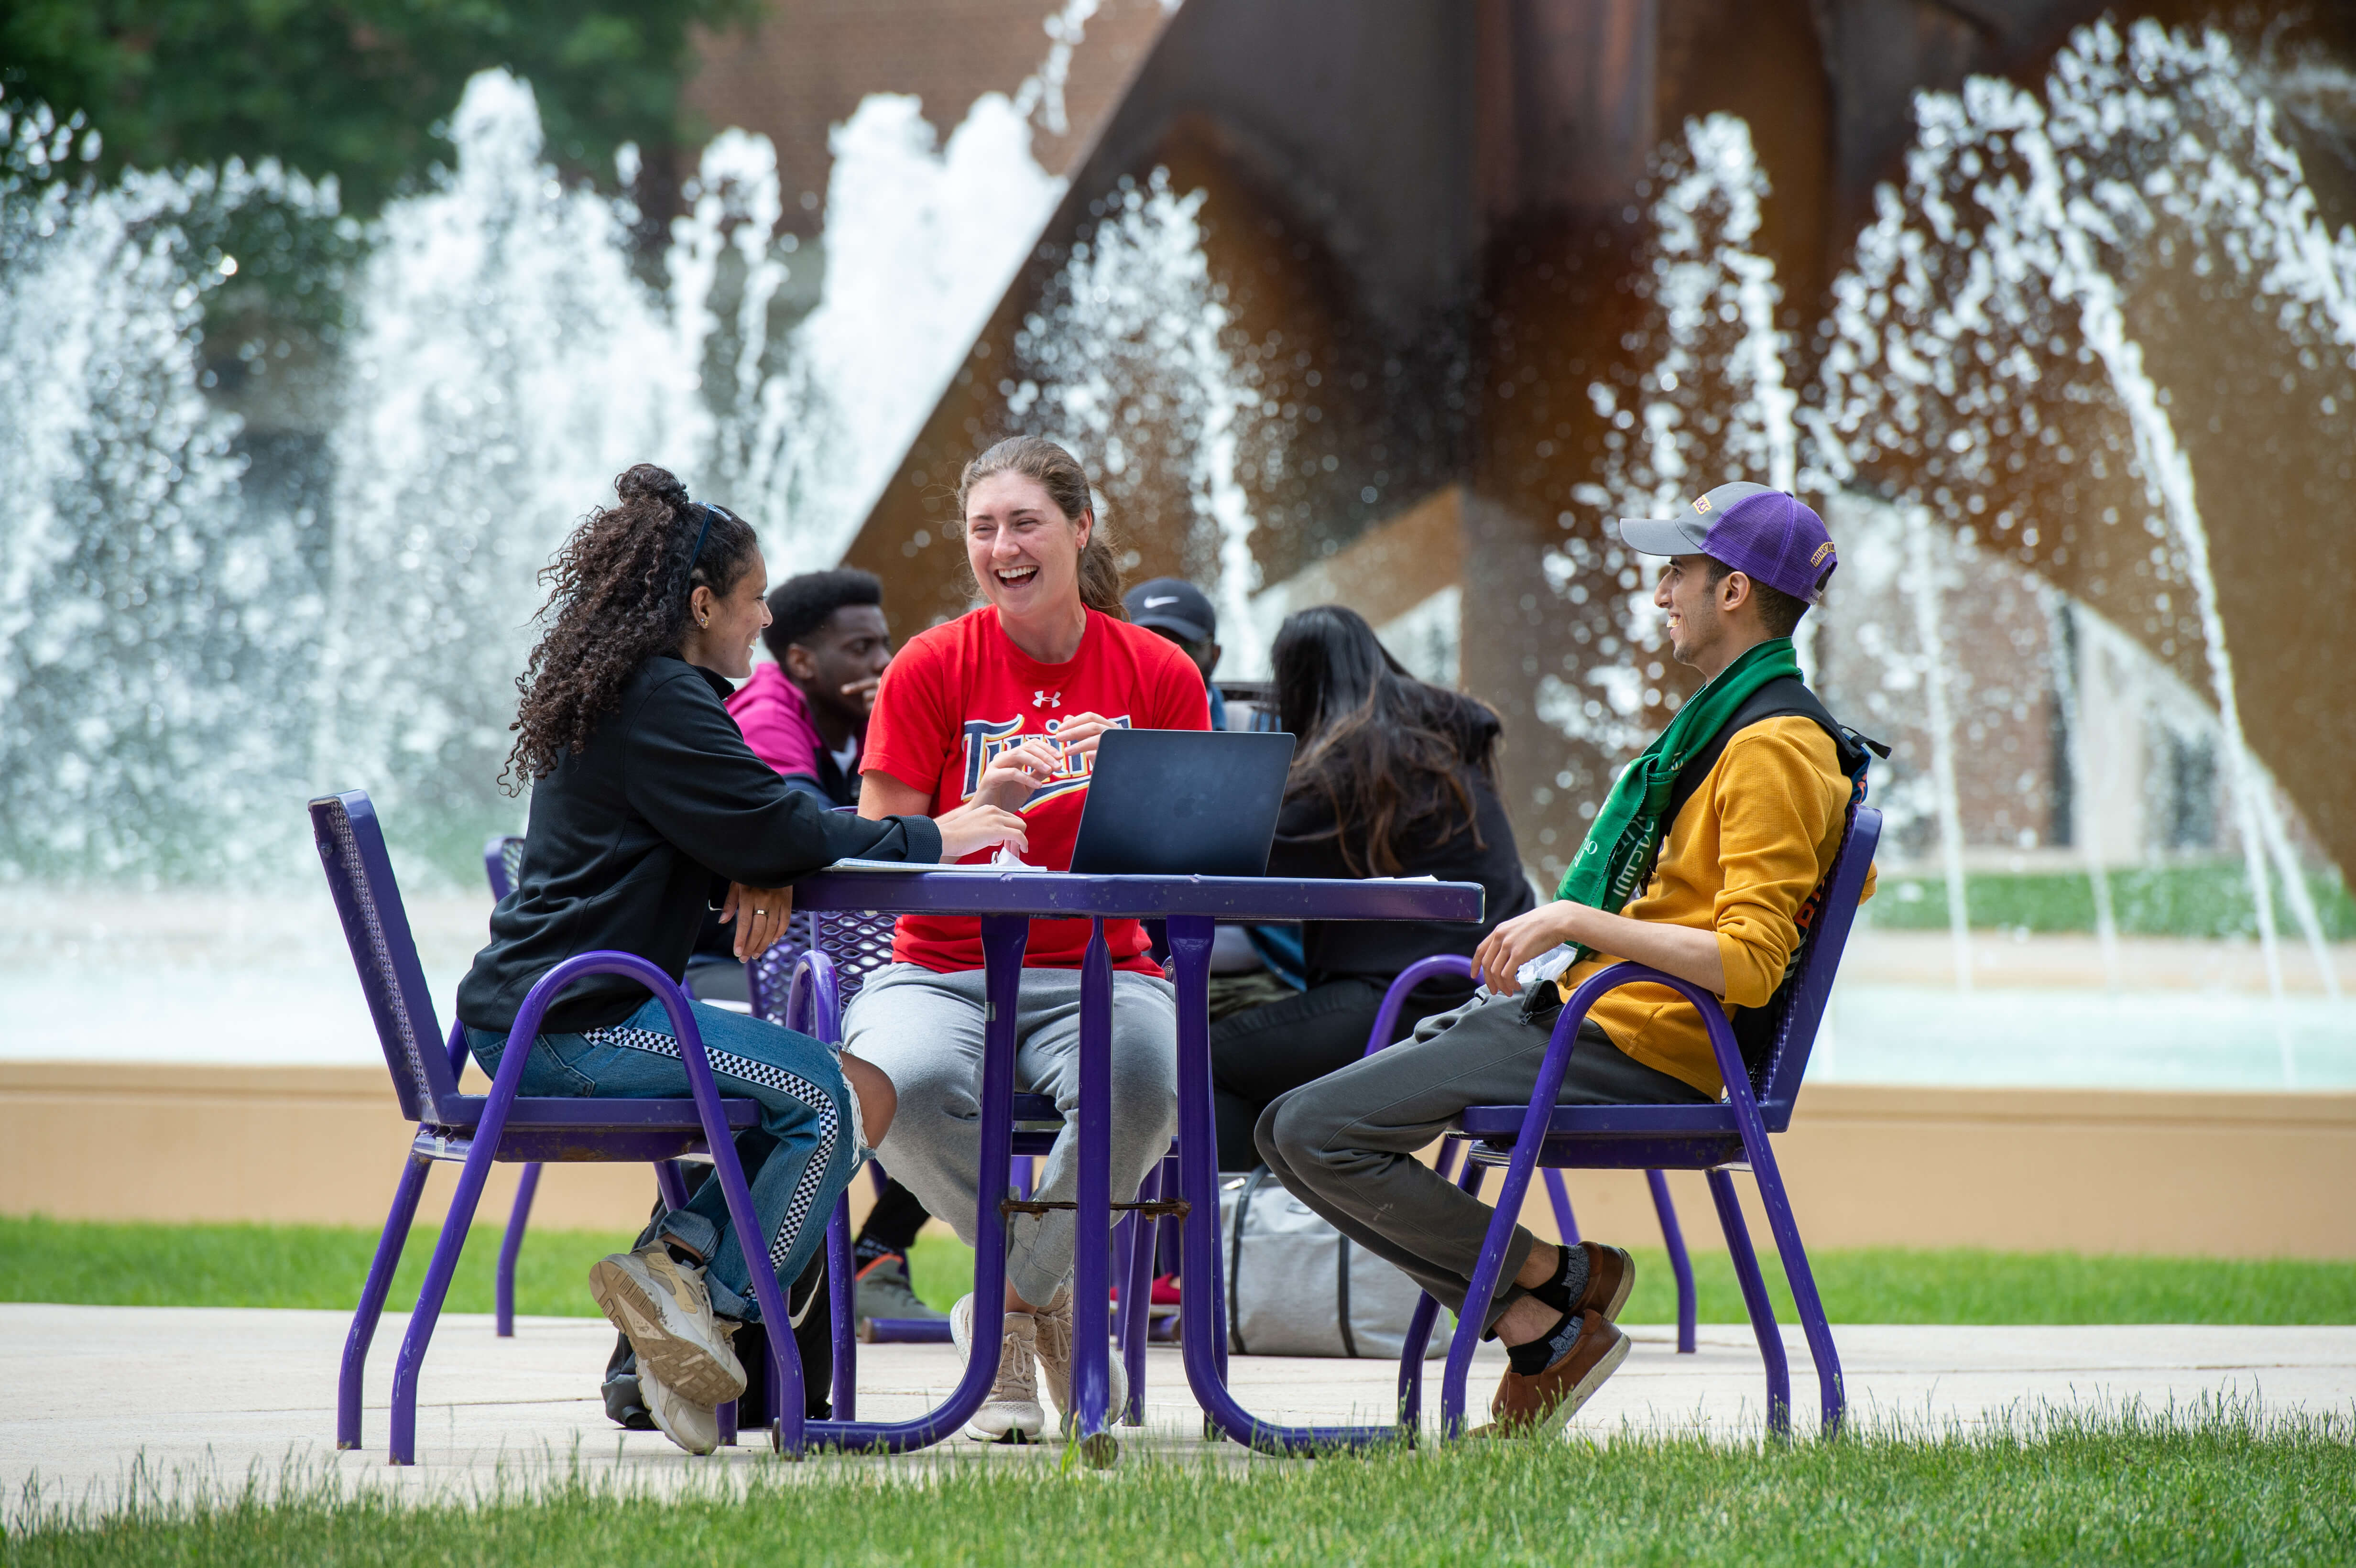 Minnesota State University, Mankato: College of Science, Engineering, and Technology